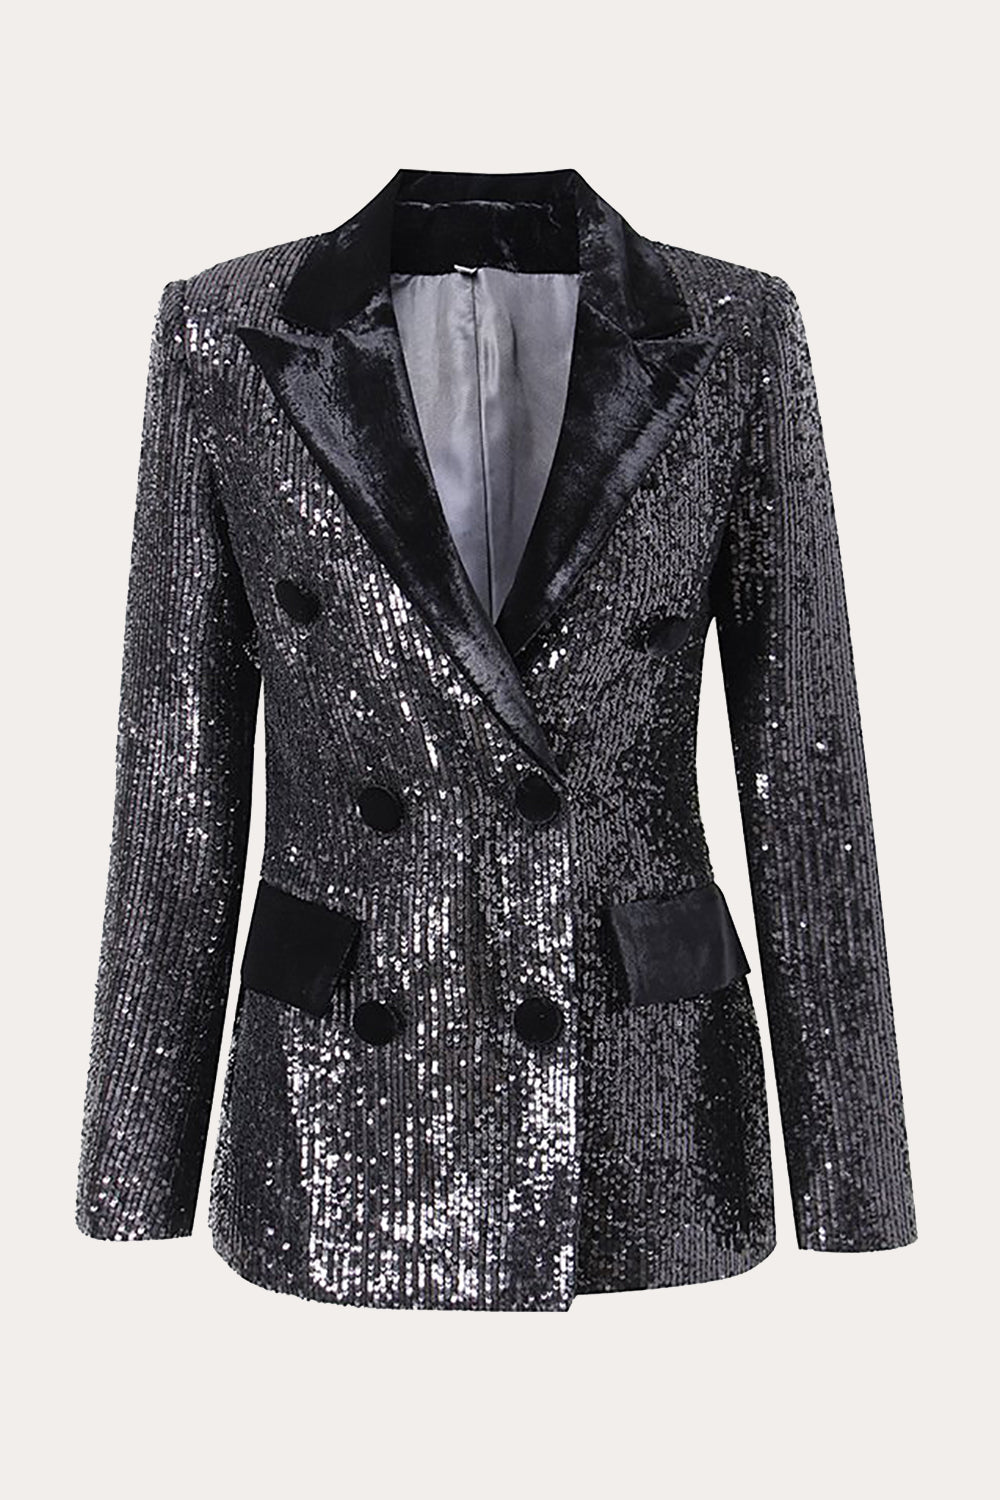 Sparkly Black Sequins Double Breasted Women Prom Blazer